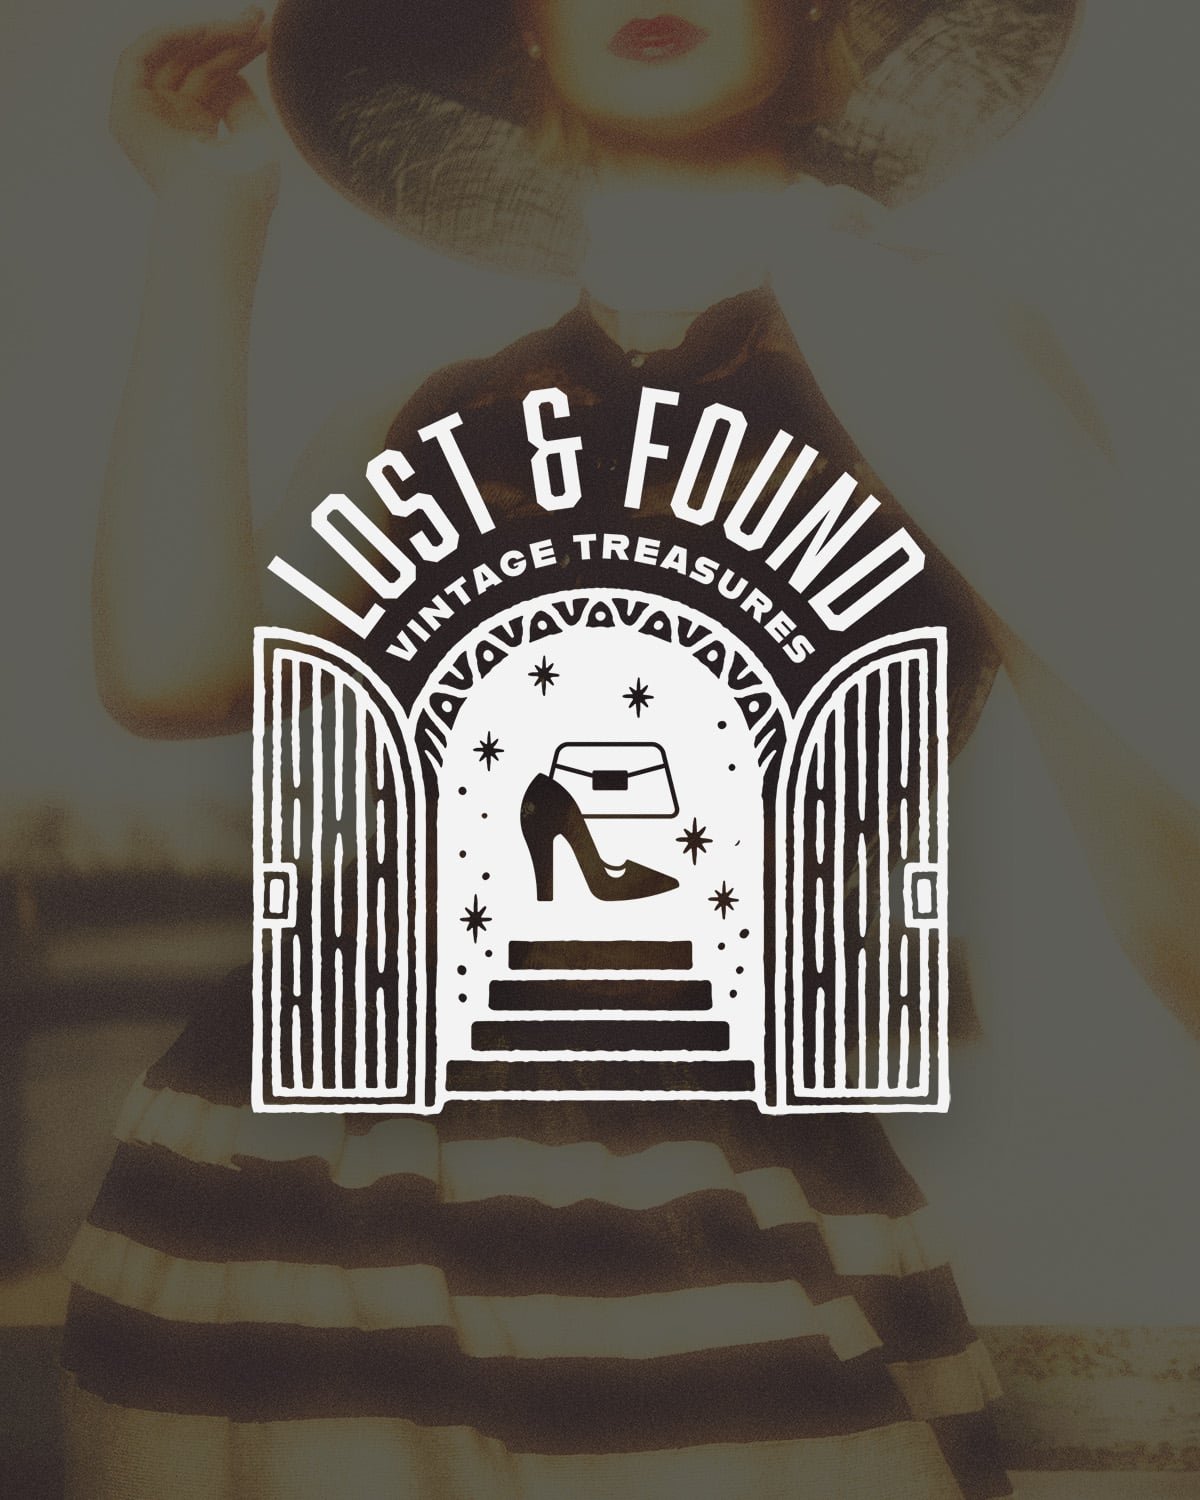 The text "Lost & Found Vintage Boutique" along with a door opened to stairs leading to a purse and shoe appear on top of a woman posing in a dress and hat